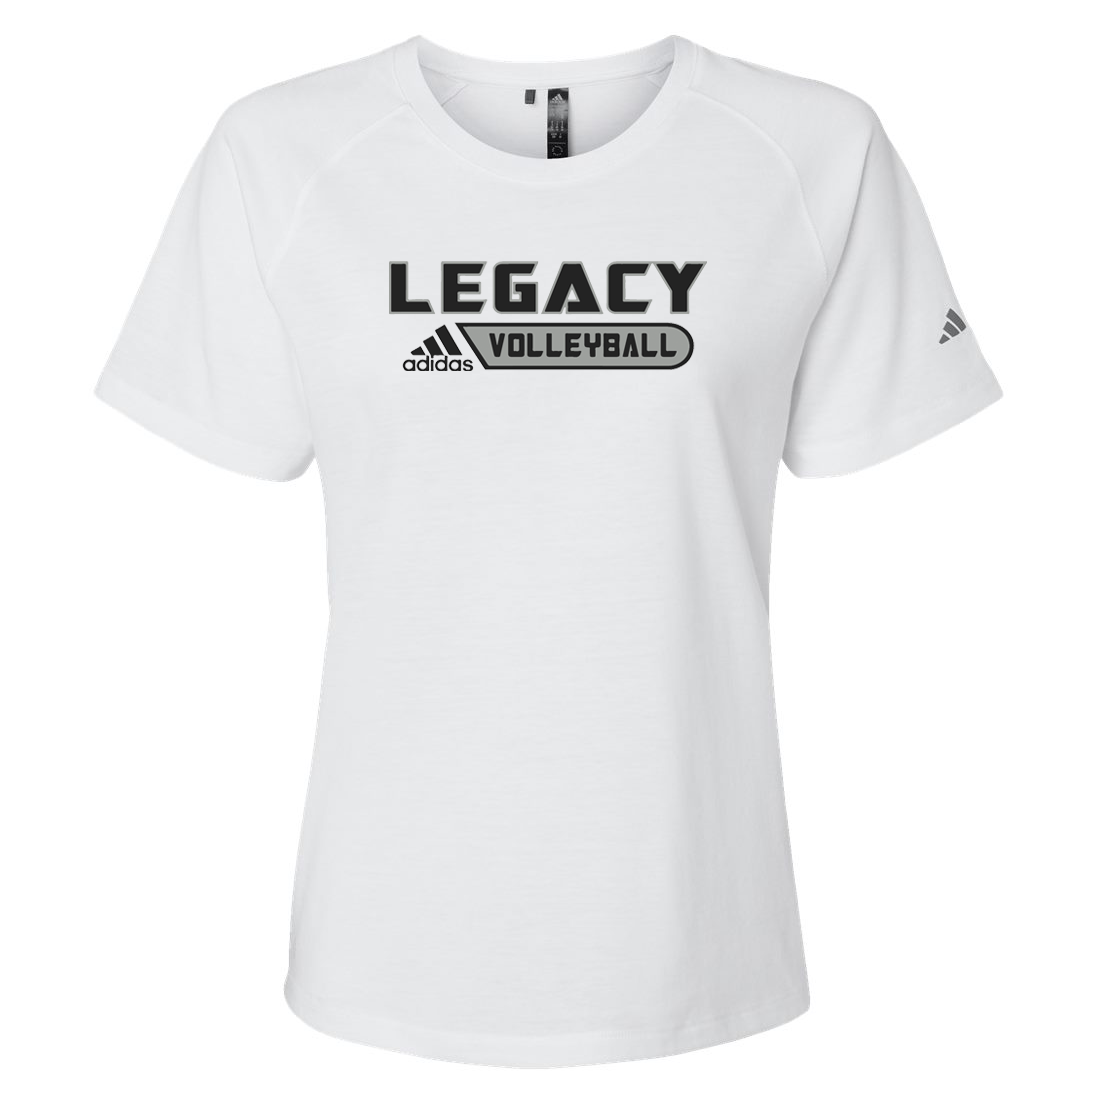 Legacy Volleyball Club Adidas Ladies Blended T-Shirt